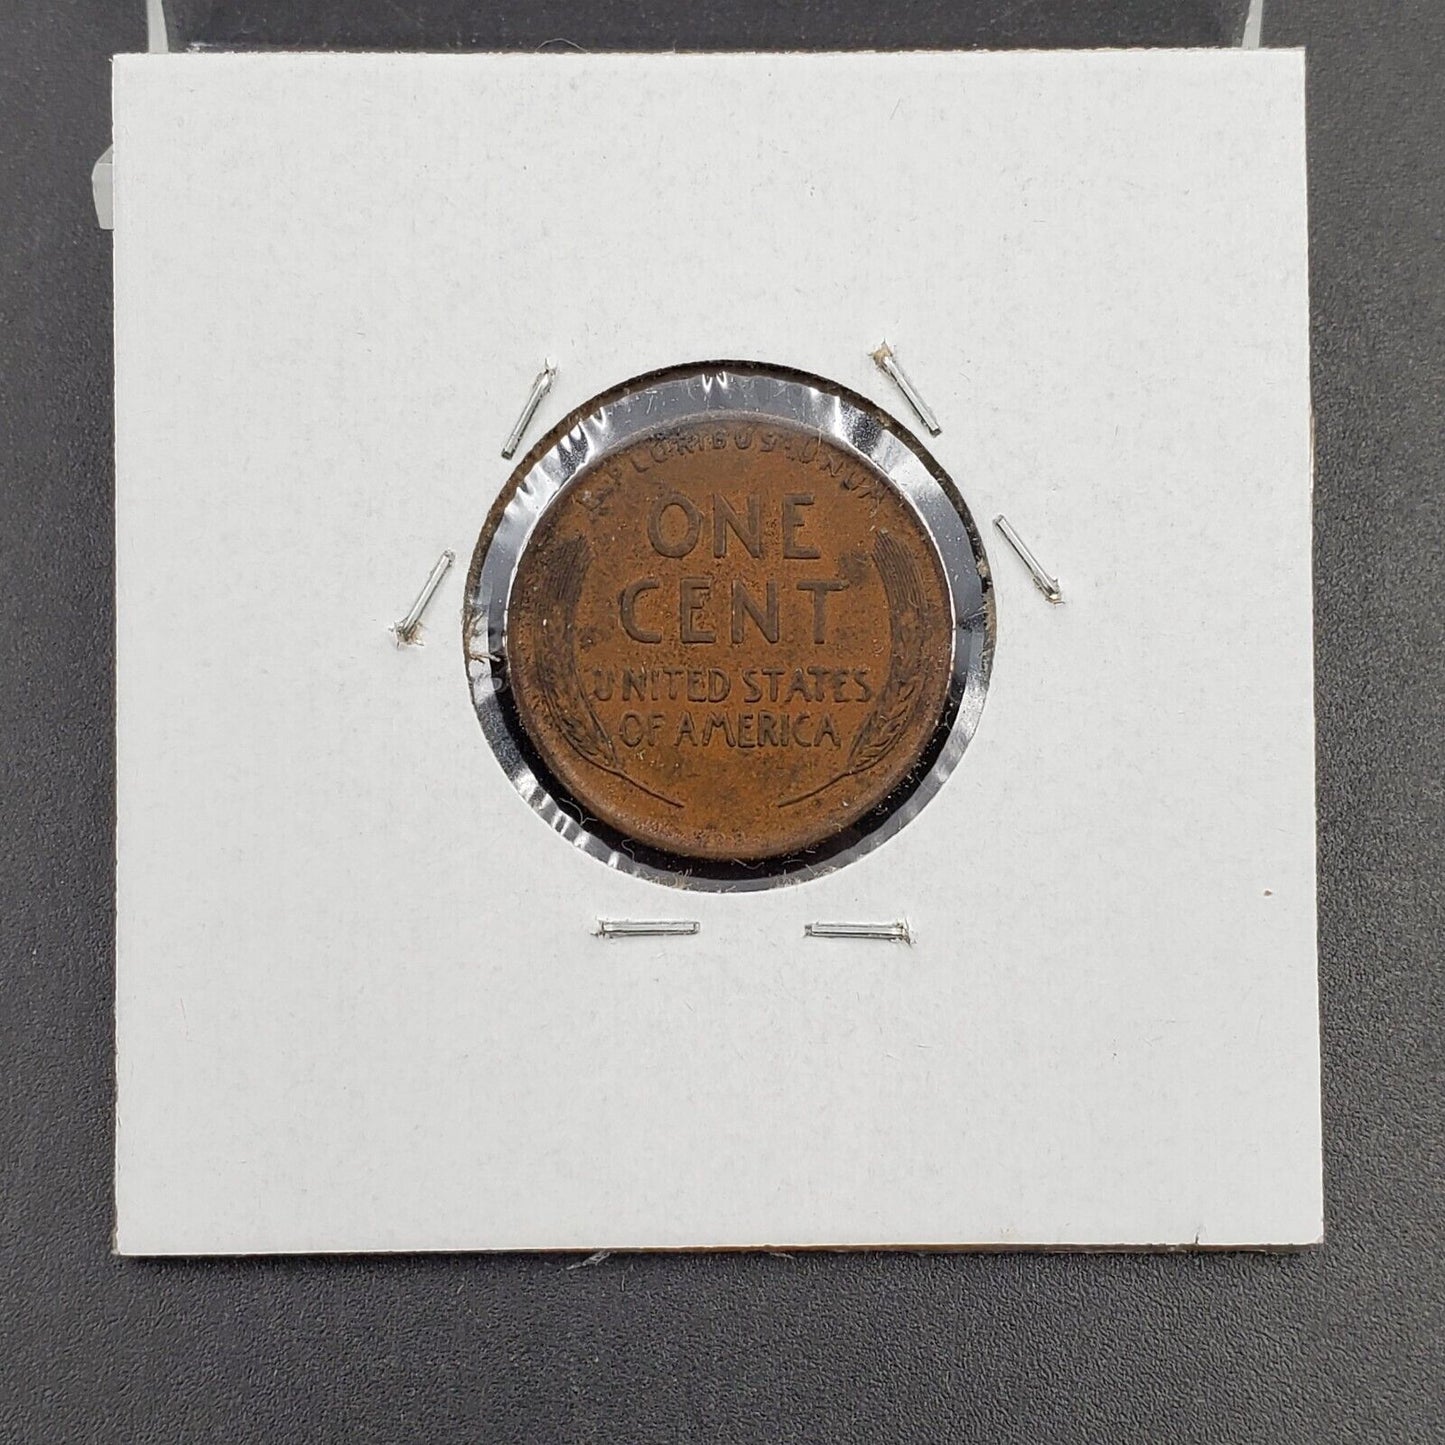 1909 P VDB Lincoln Wheat Cent Penny Coin